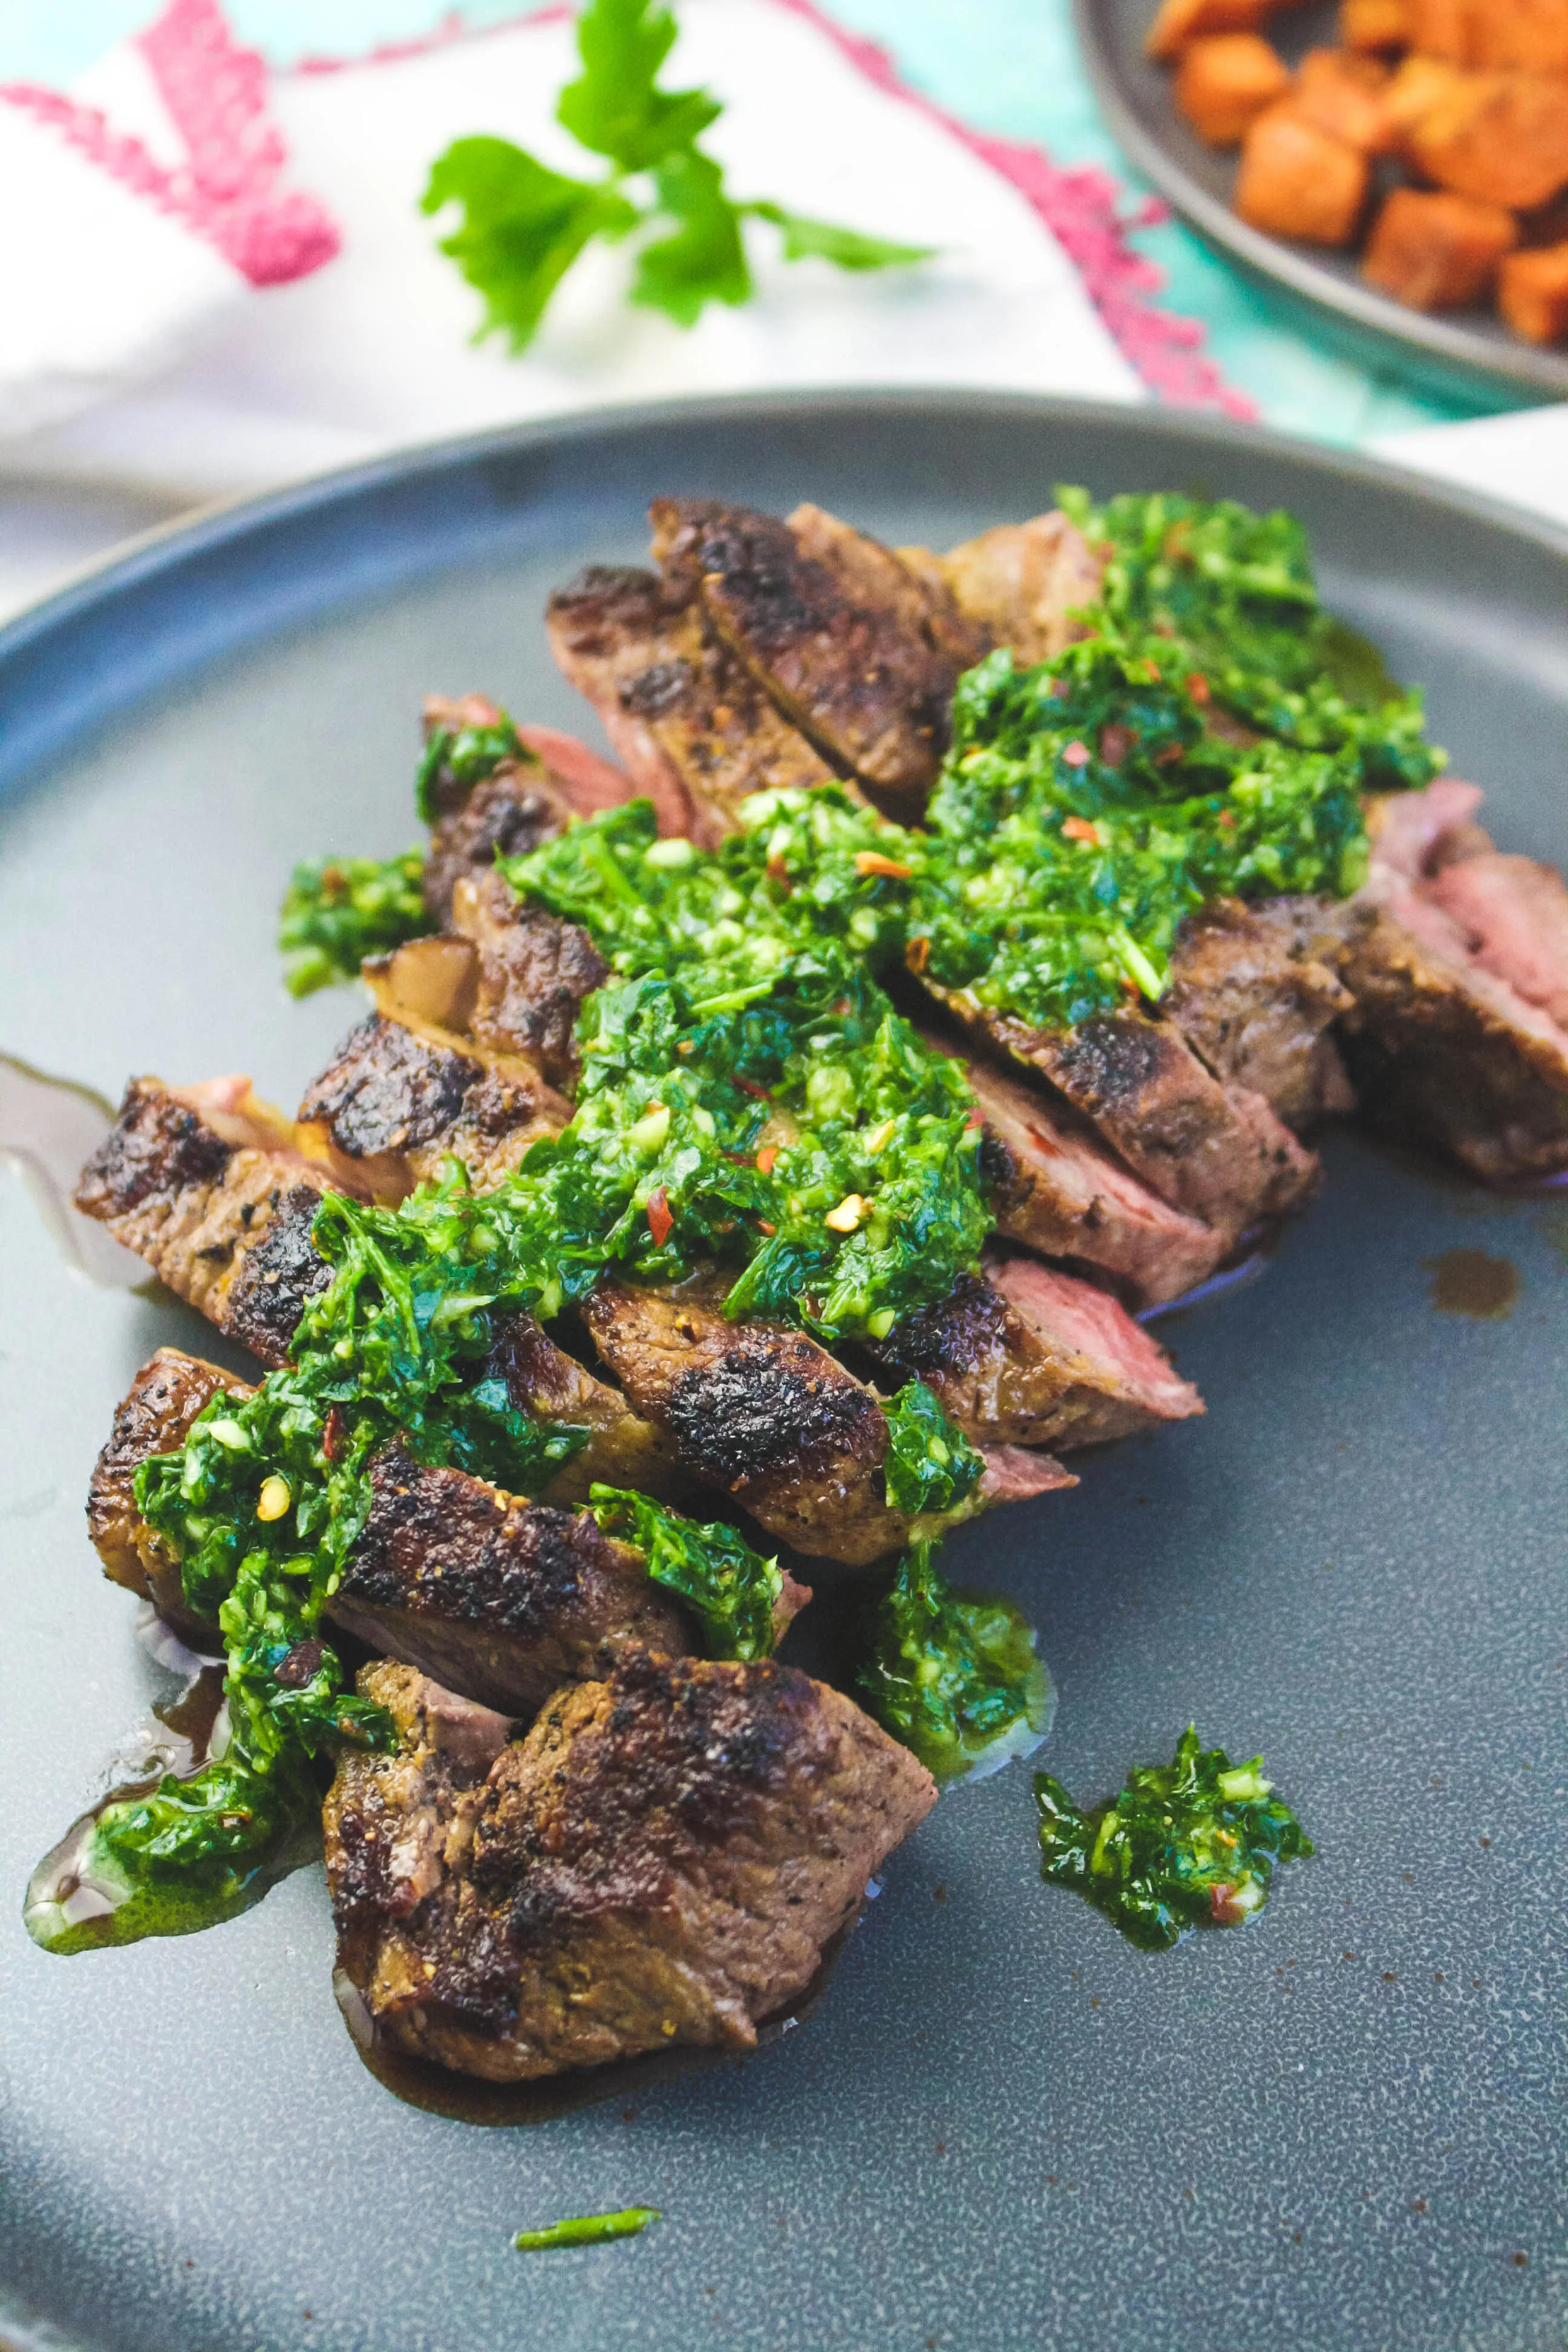 Skillet-Cooked NY Strip Steak with Chimichurri Sauce is full of great flavor for a main dish. Skillet-Cooked NY Strip Steak with Chimichurri Sauce is easy to make for a lovely main dish.